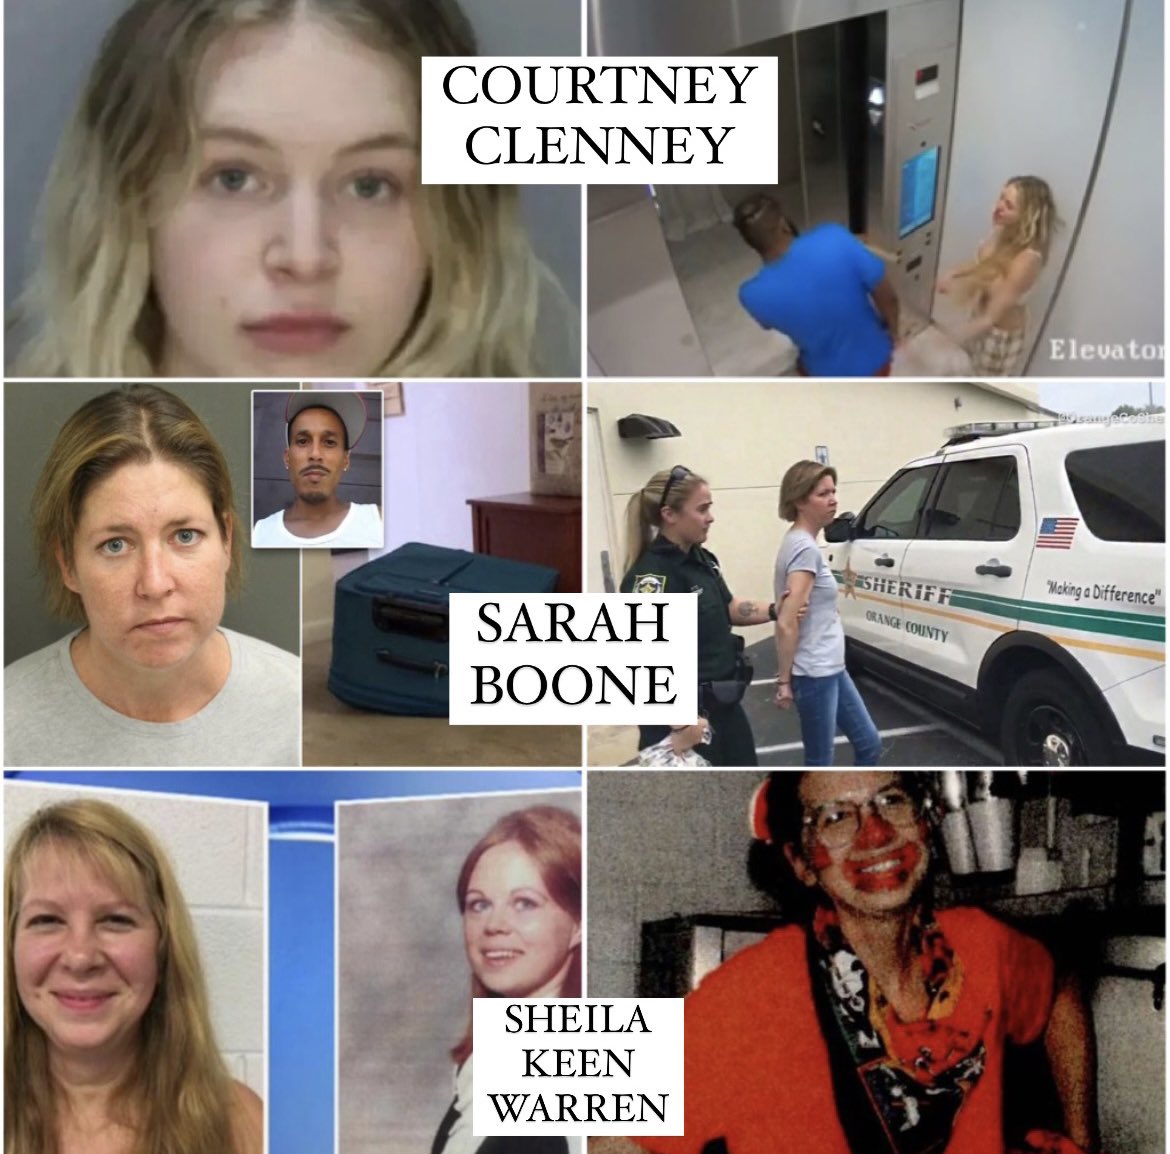 what trial is everyone gonna be glued to when it comes to @CourtTV ? i’m keeping an eye on them!

• #CourtneyClenney - her birthday this friday! no trial date yet!
• #SarahBoone - suitcase murder trial expected 24 july.
• #SheilaKeenWarren killer clown trial expected -16 may.